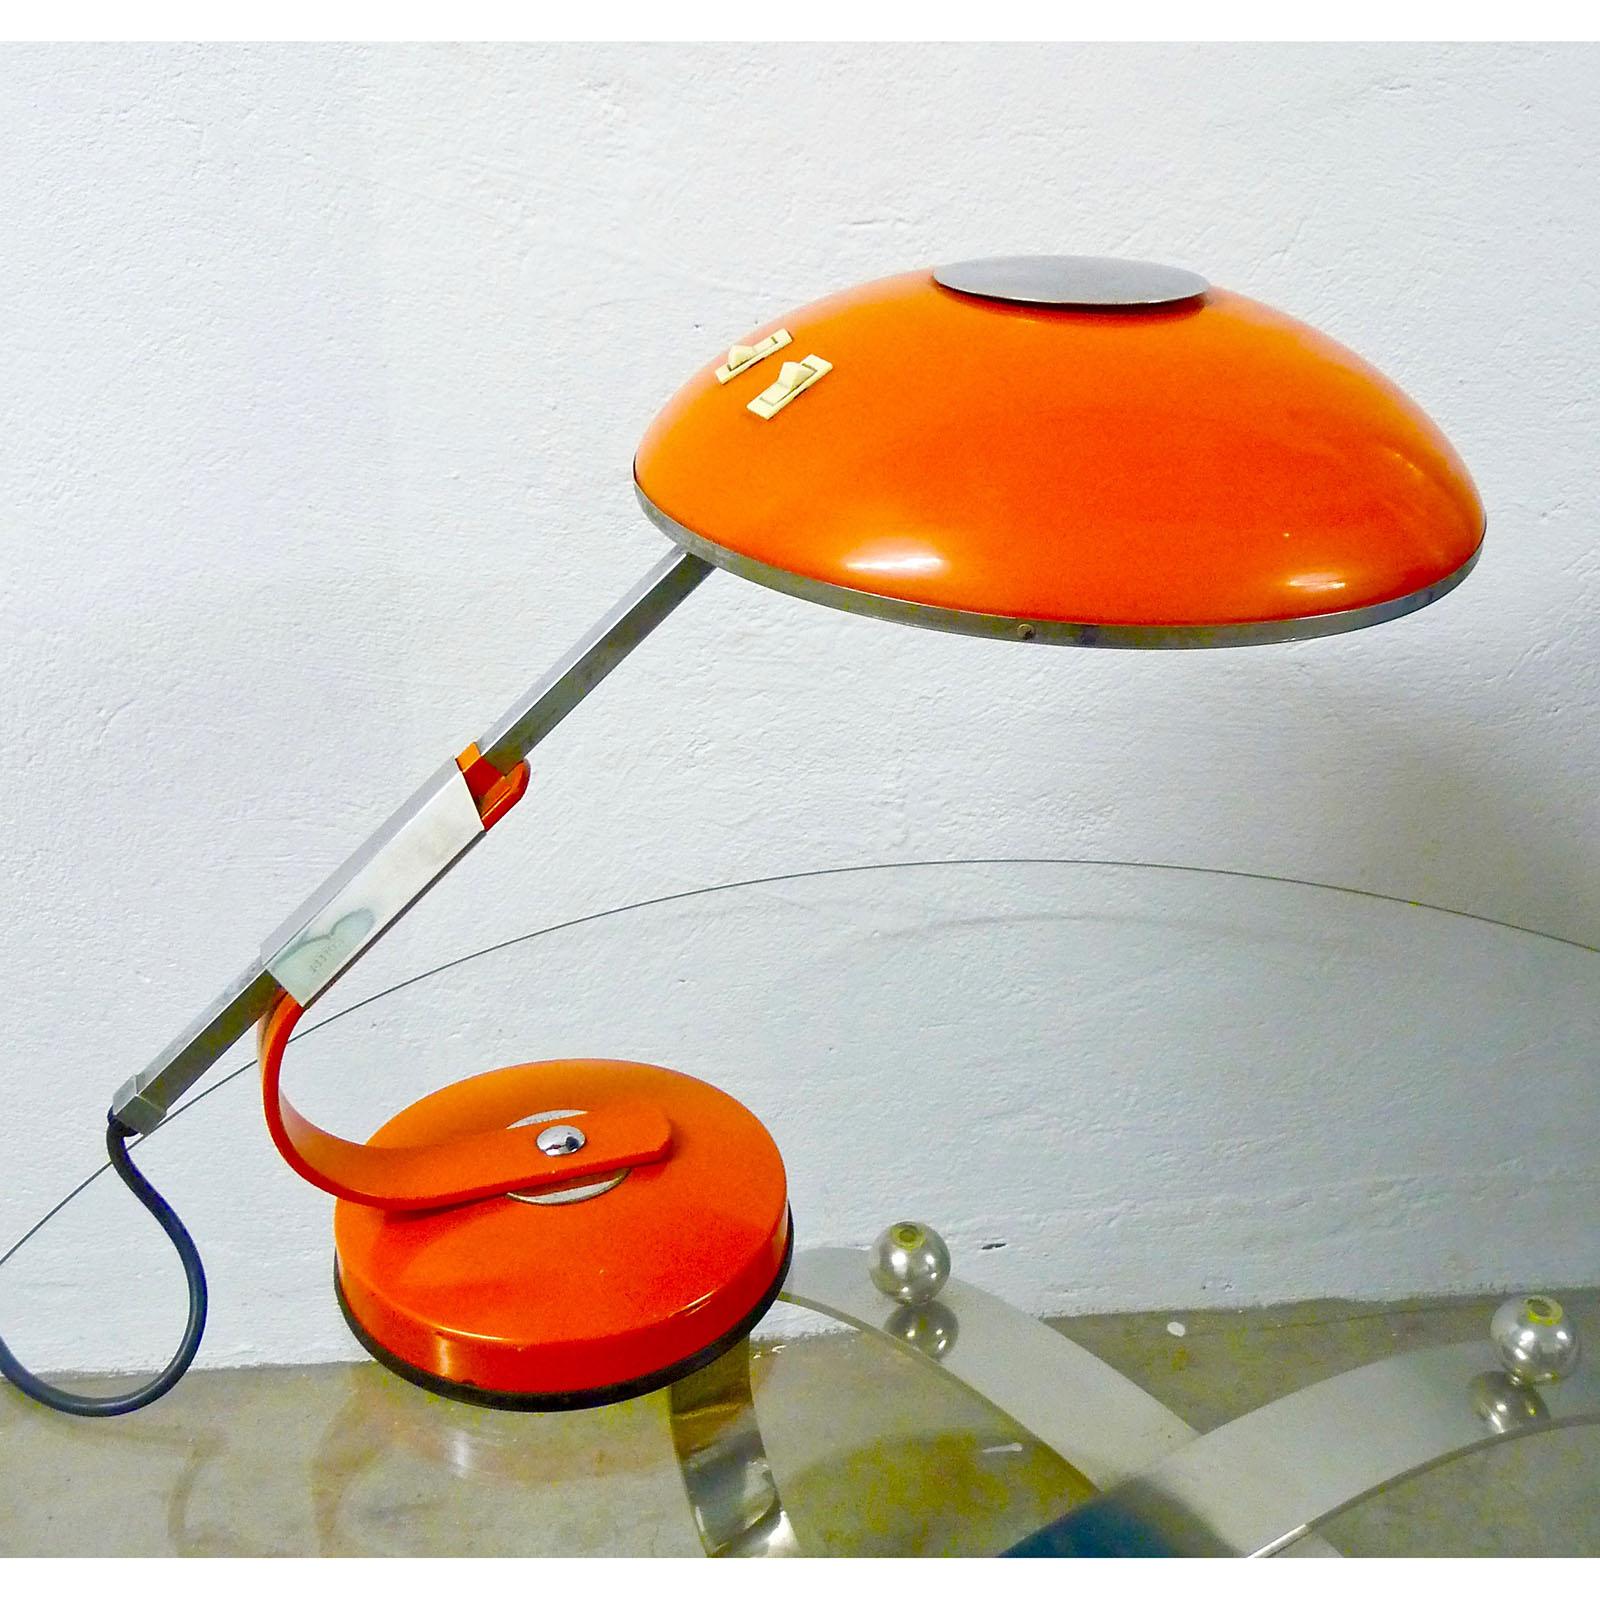 Mid-century desk lamp designed by Ferdinand Solere for SolR Paris, France 1950s, orange lacquered metal, with a telescopic stainless steel arm to lengthen it.
The light source is surrounded by a translucent blue plastic globe 